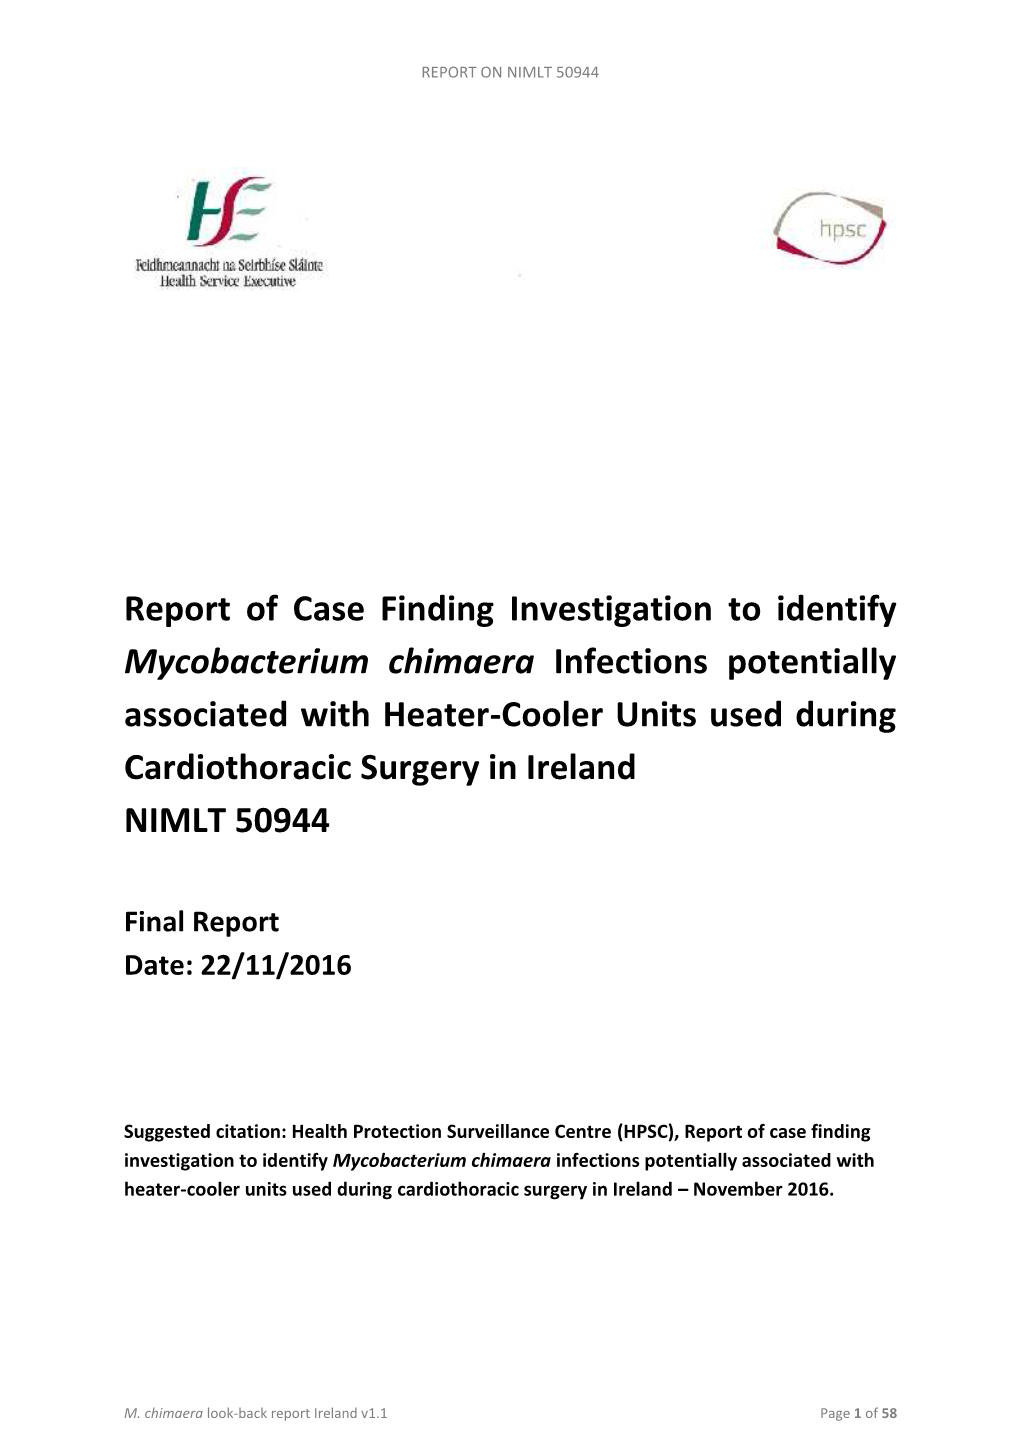 Report of Case Finding Investigation to Identify Mycobacterium Chimaera